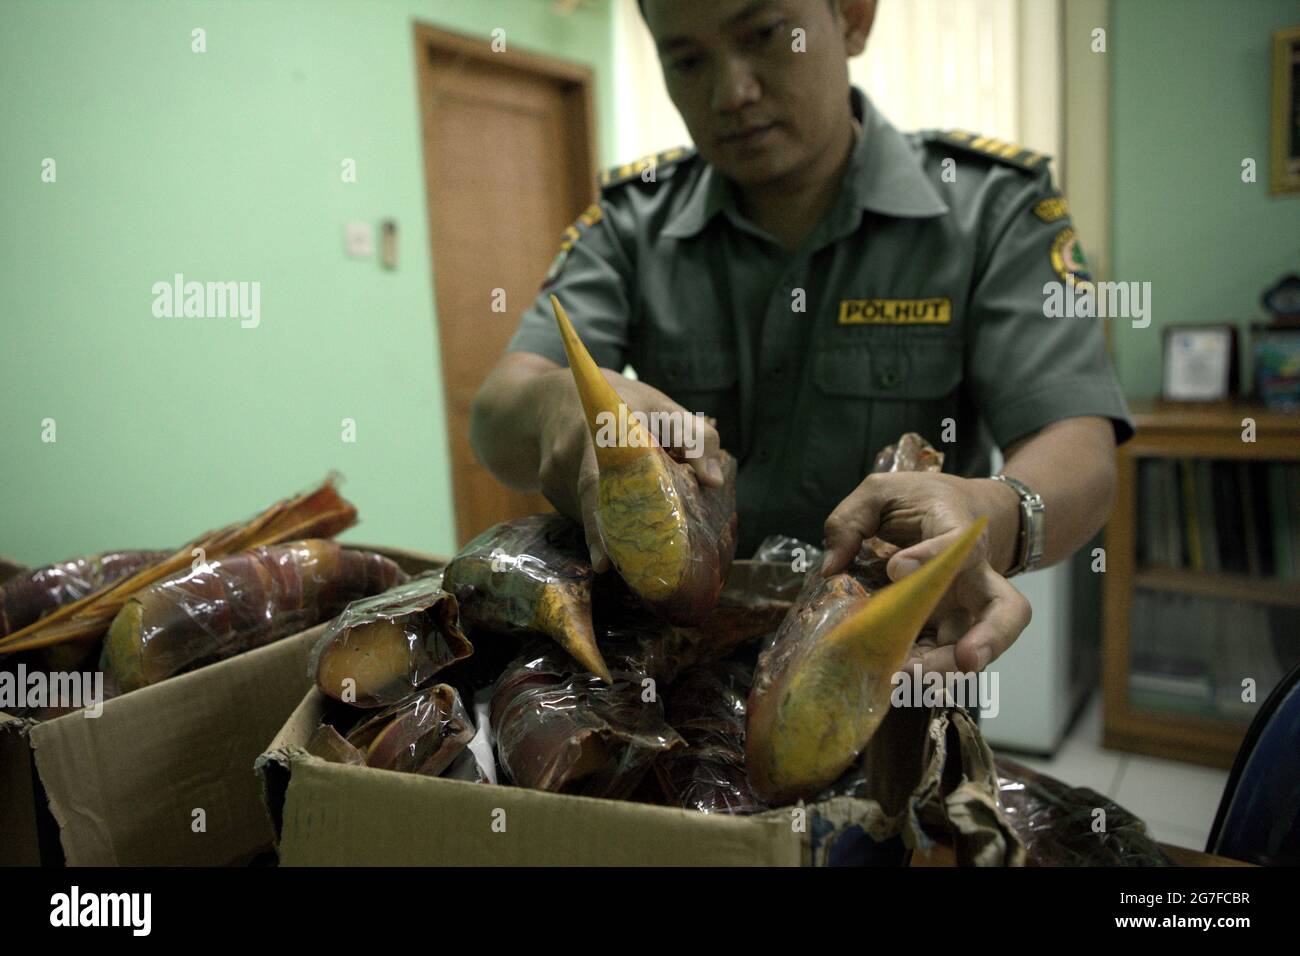 Jakarta, Indonesia. 1st July 2013. An of Indonesia's Nature Conservation Agency (BKSDA) is showing the beaks of that were seized from smuggled to China from Soekarno-Hatta International Airport